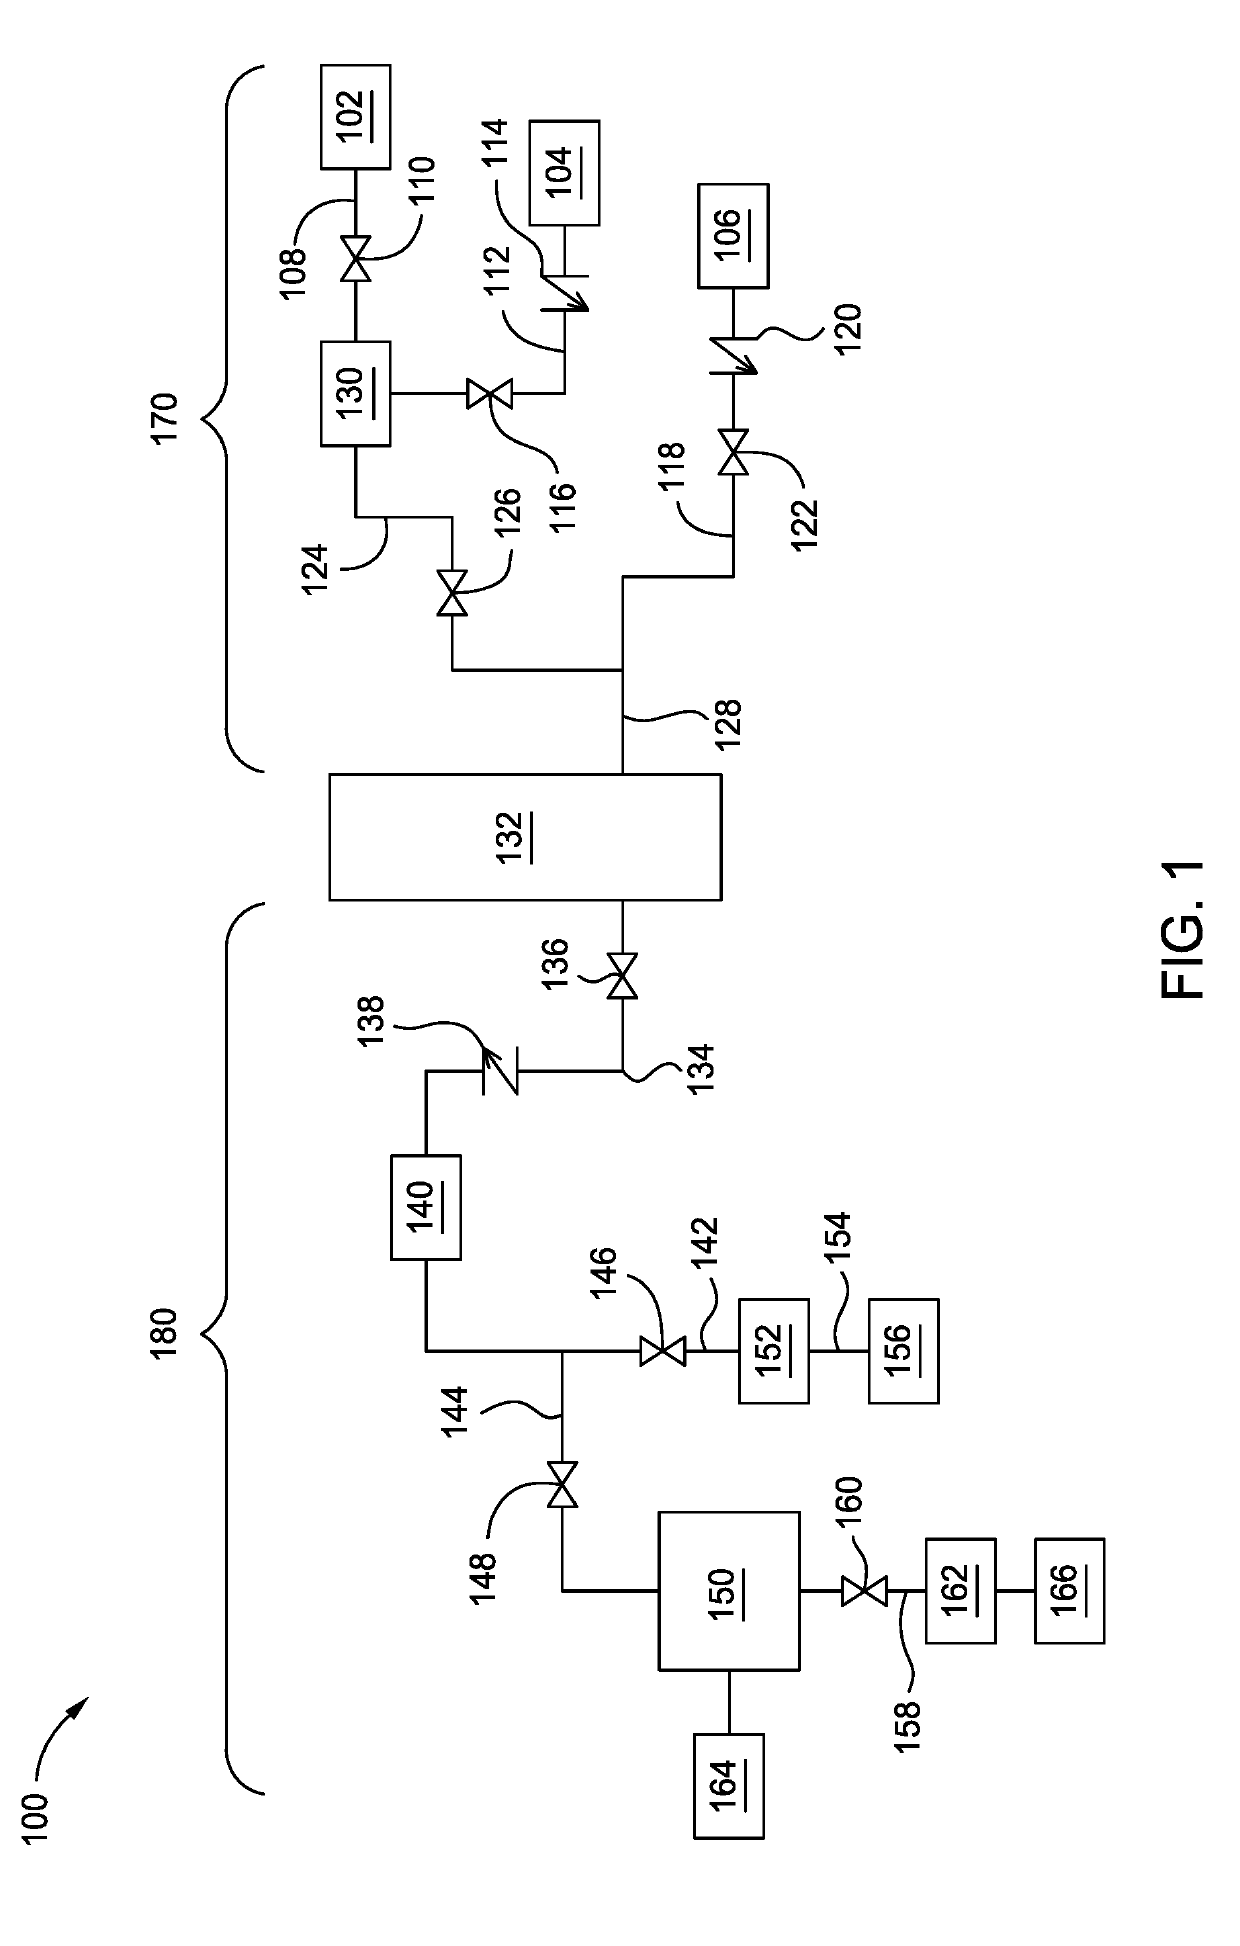 Condenser system for high pressure processing system